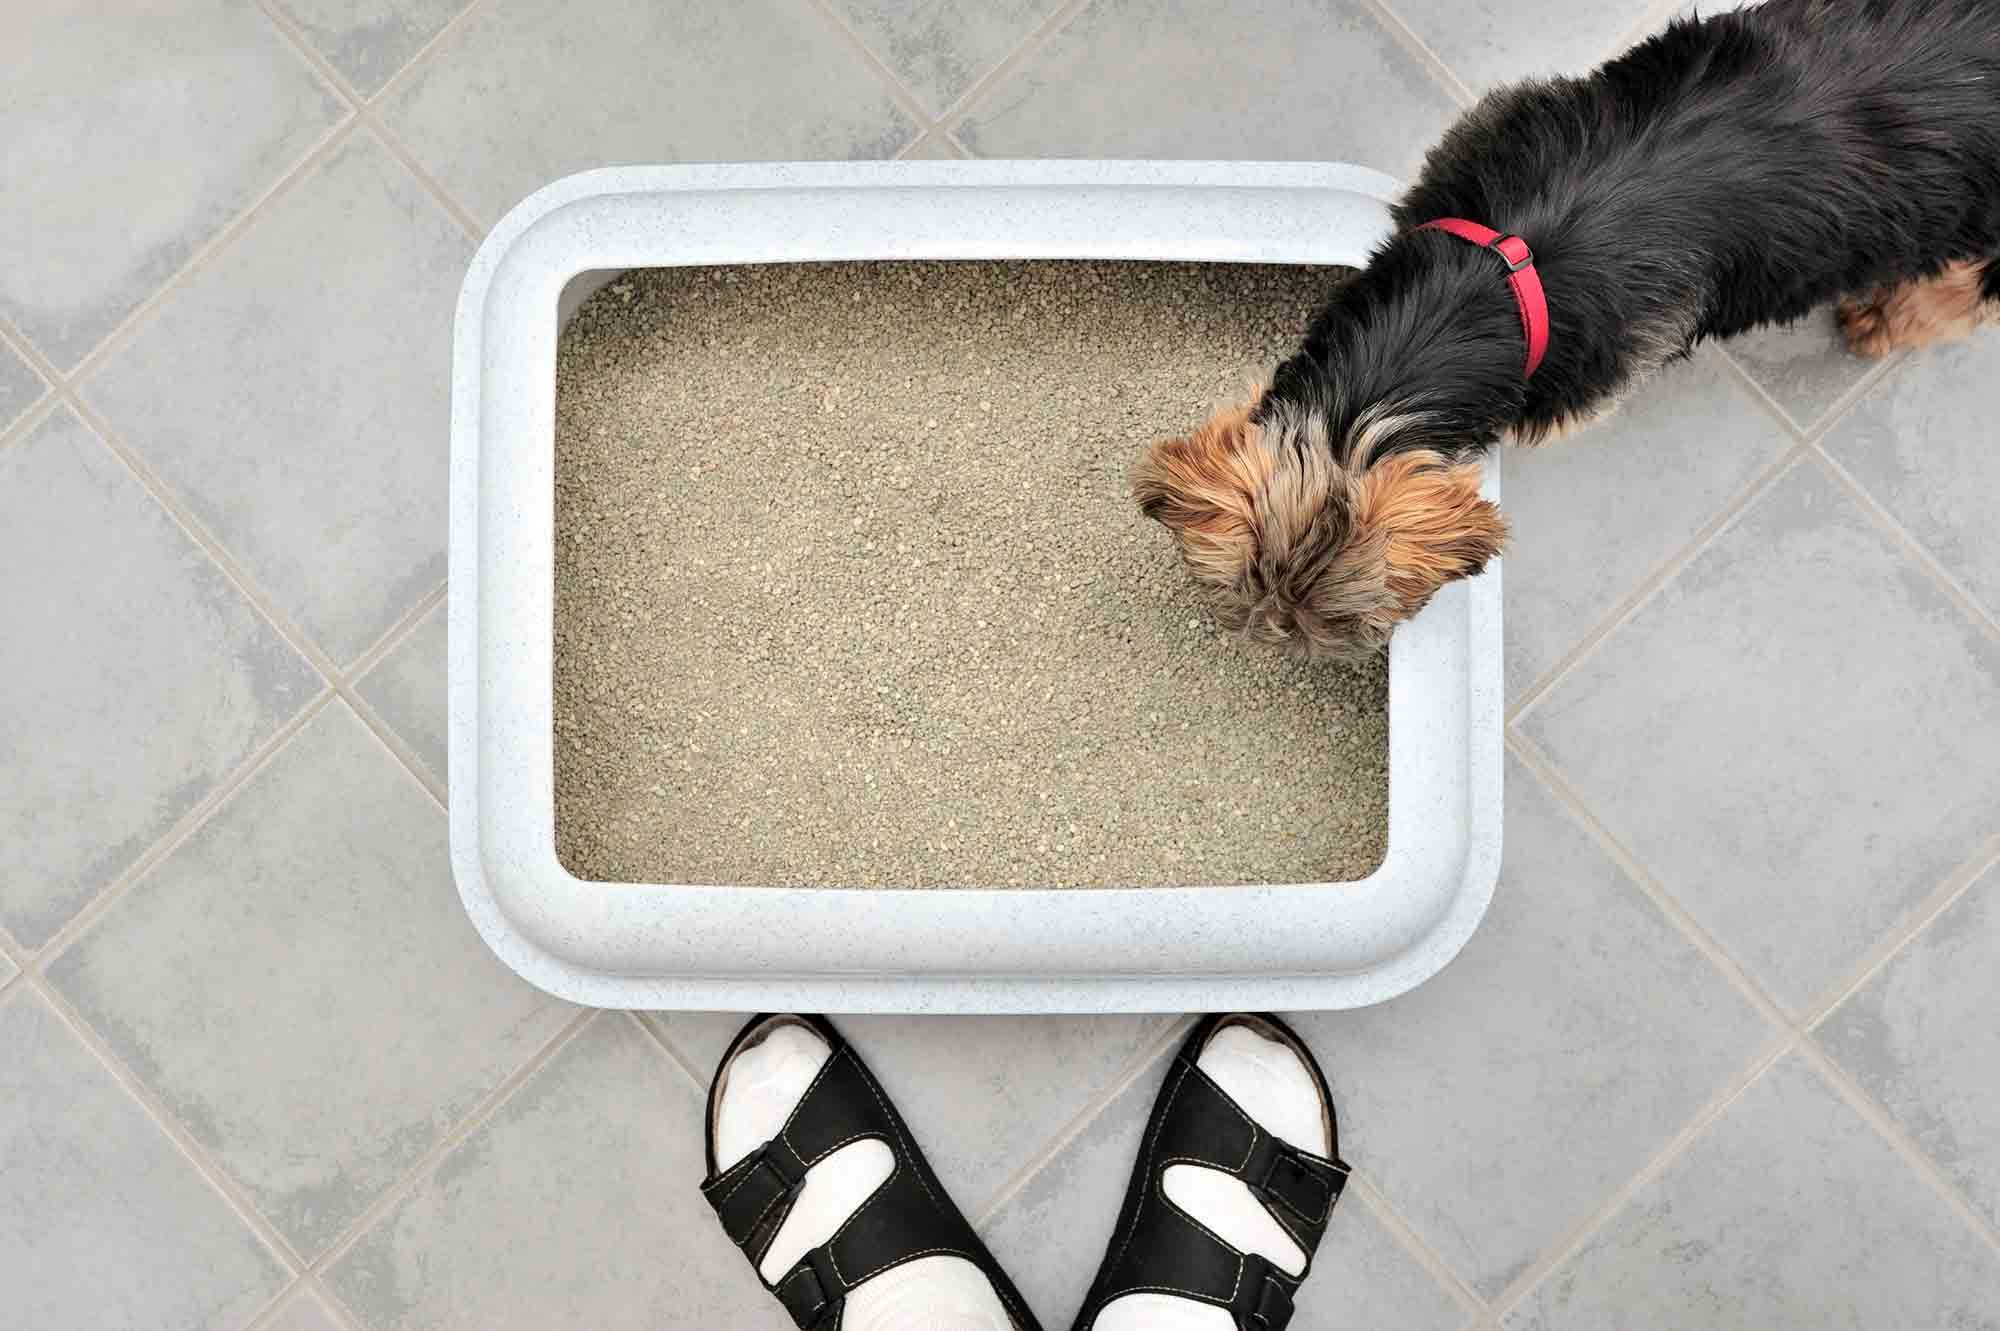 10 Foolproof Ways To Prevent Your Dog From Going Near The Litter Box